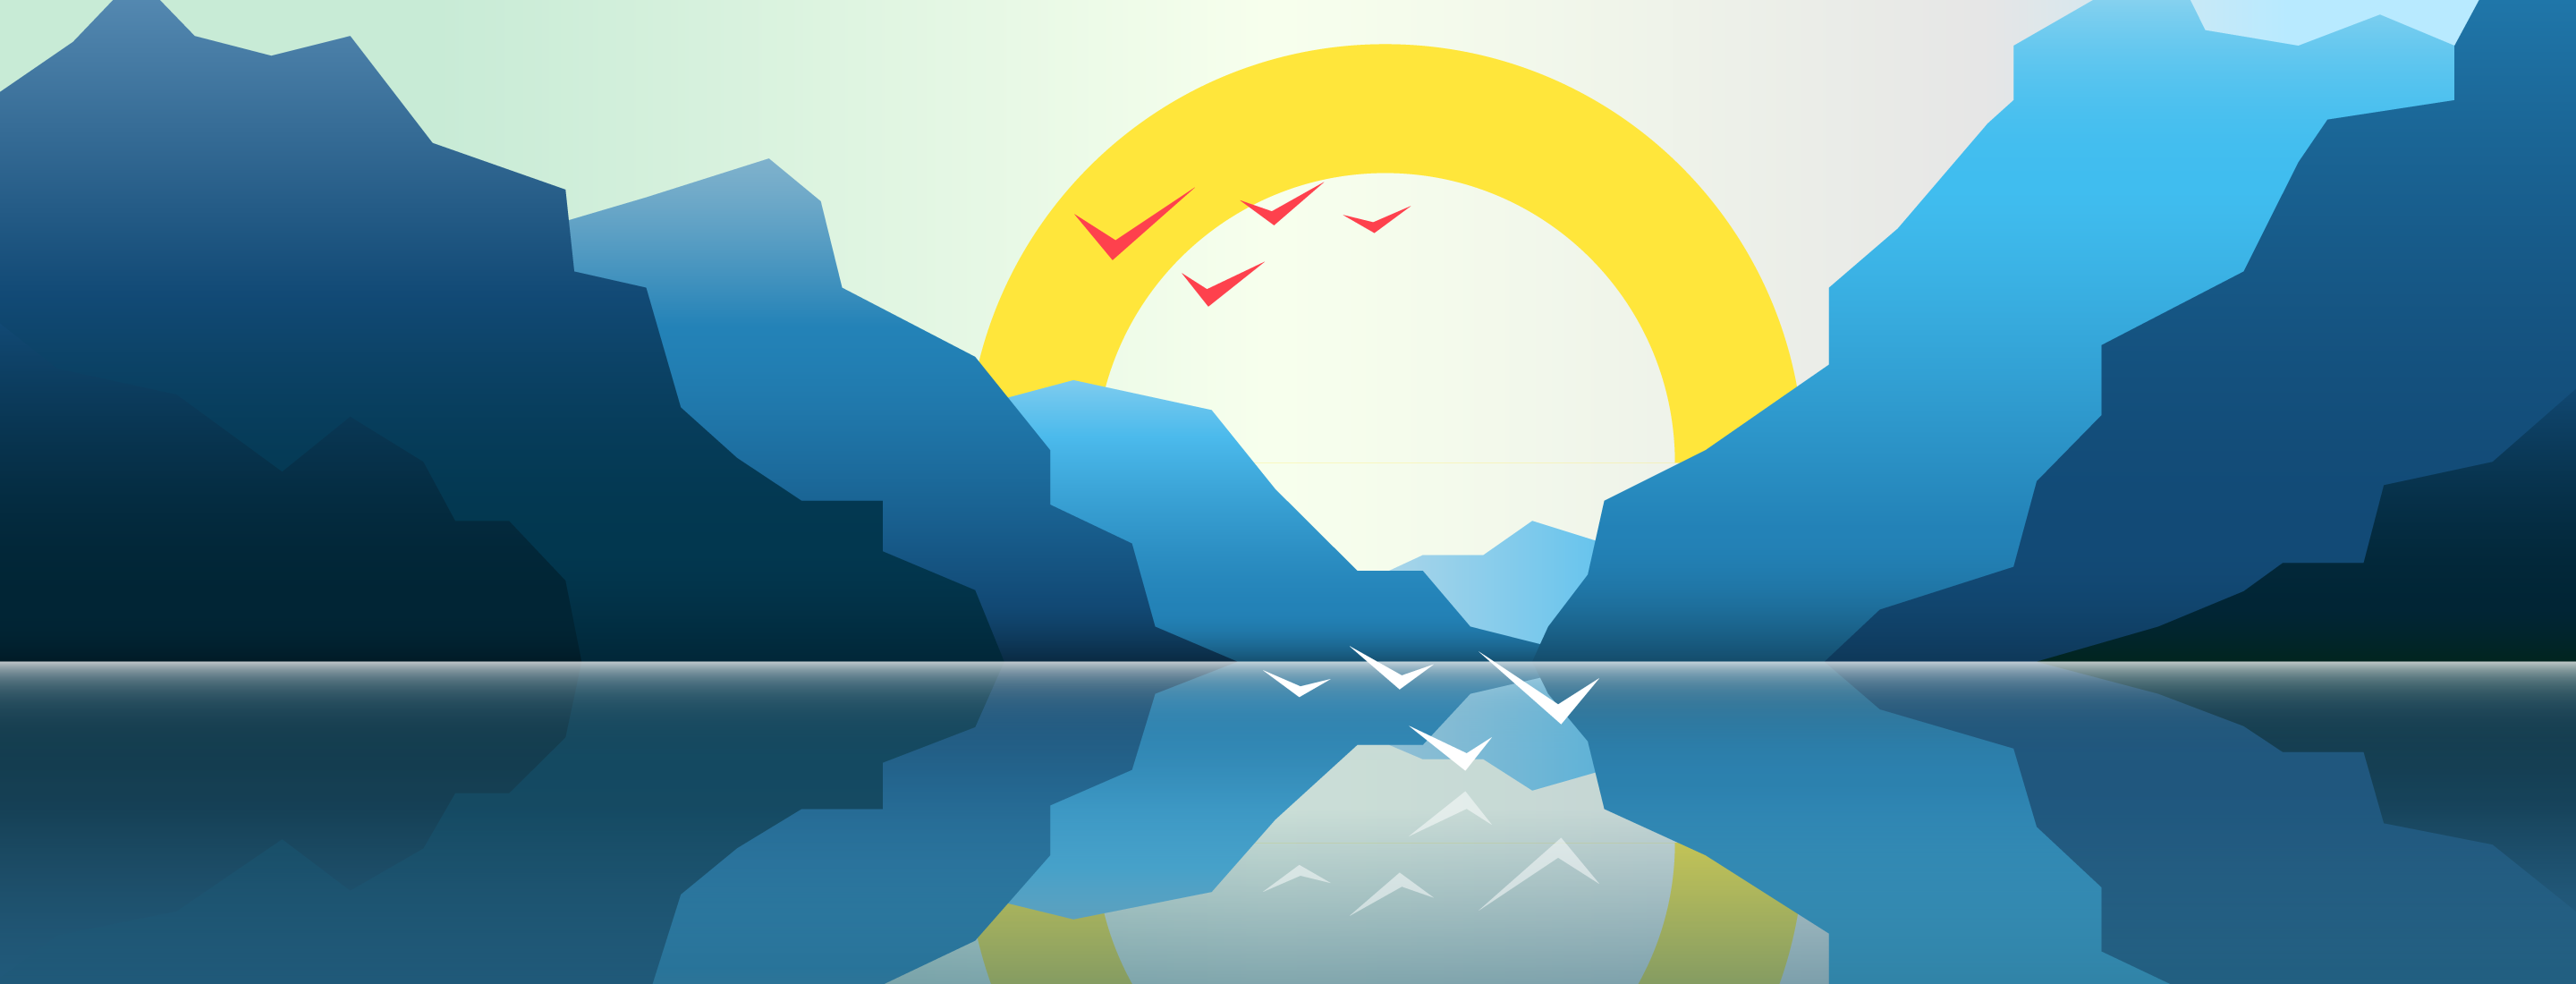 Mountain and lake illustration with birds.